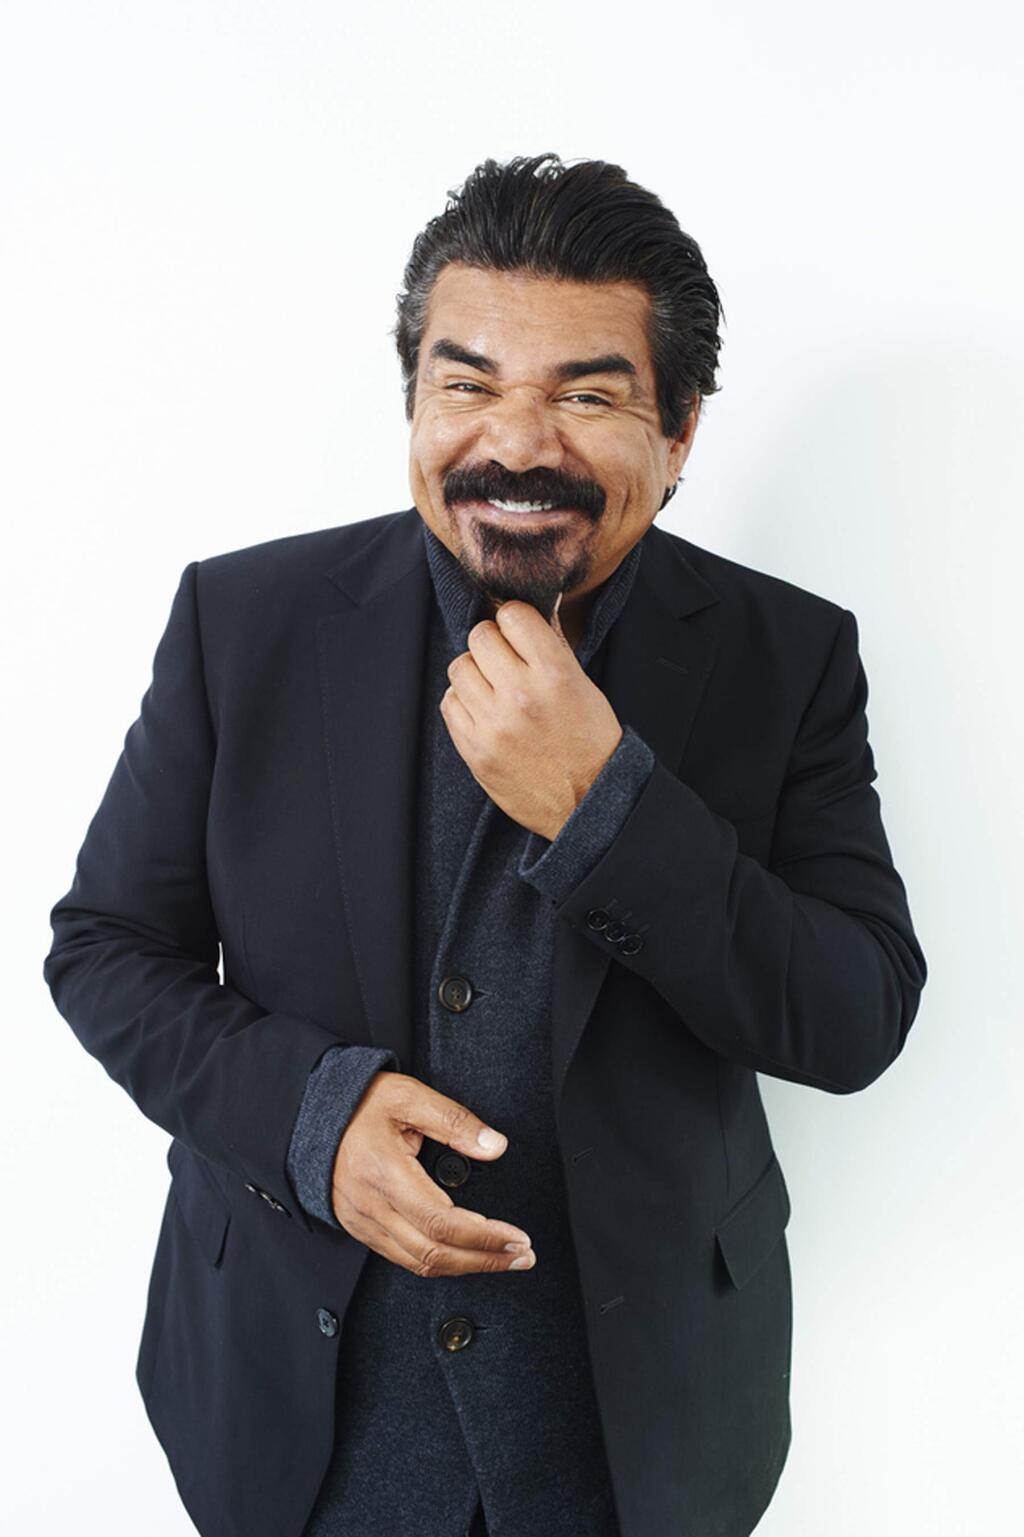 Comedian George Lopez will perform at the Luther Burbank Center on Friday, July 26, 2019. (SCOTT GRIES/ ASSOCIATED PRESS)